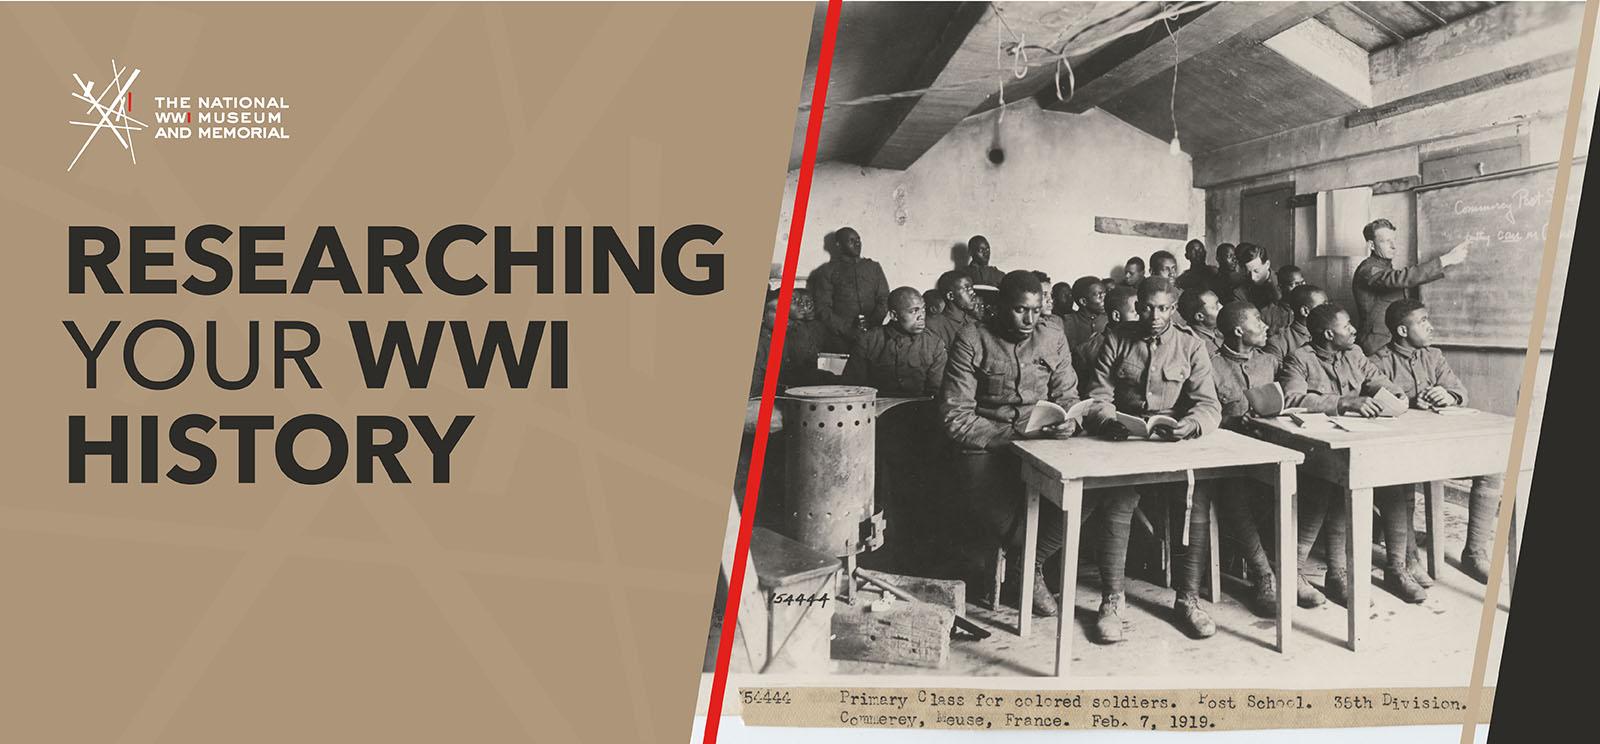 Image: black and white photo of a barracks classroom filled with rows of Black soldiers sitting at desks. Text: 'Researching your WWI history'